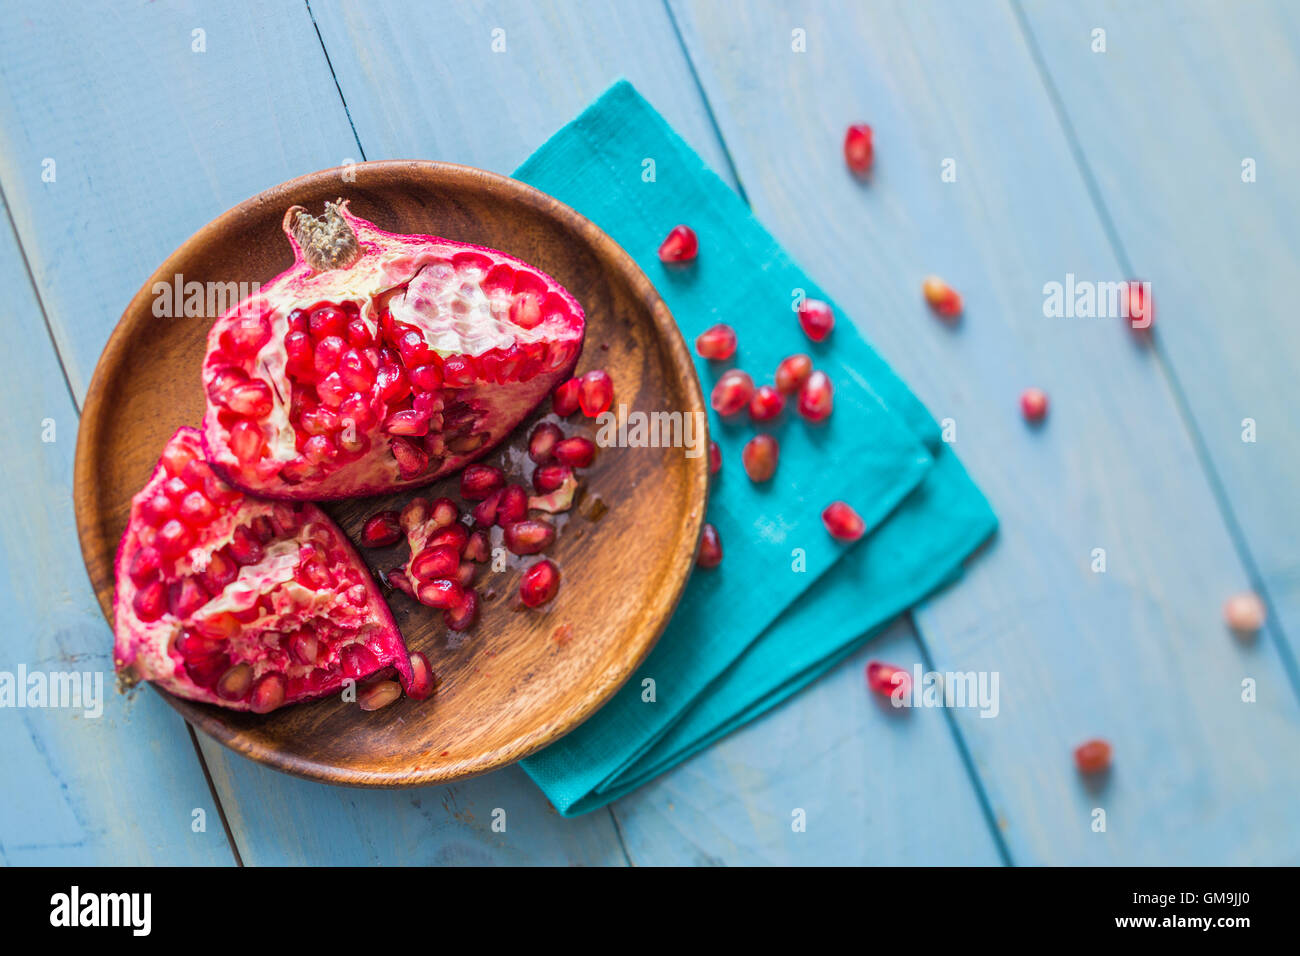 Overhead view of halved pomegranate on wooden plate Stock Photo